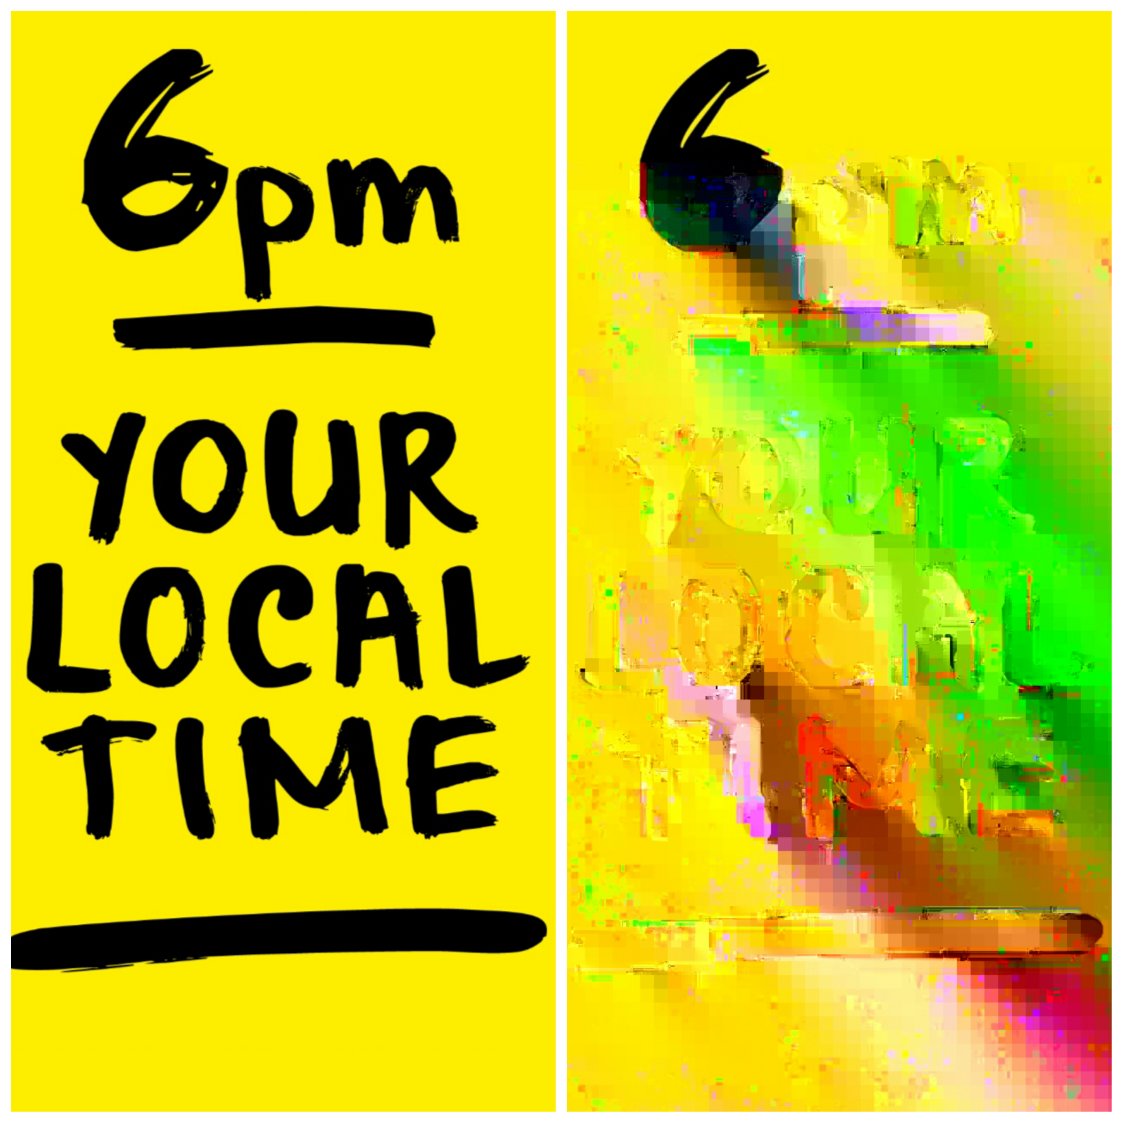 6PM YOURLOCALTIME